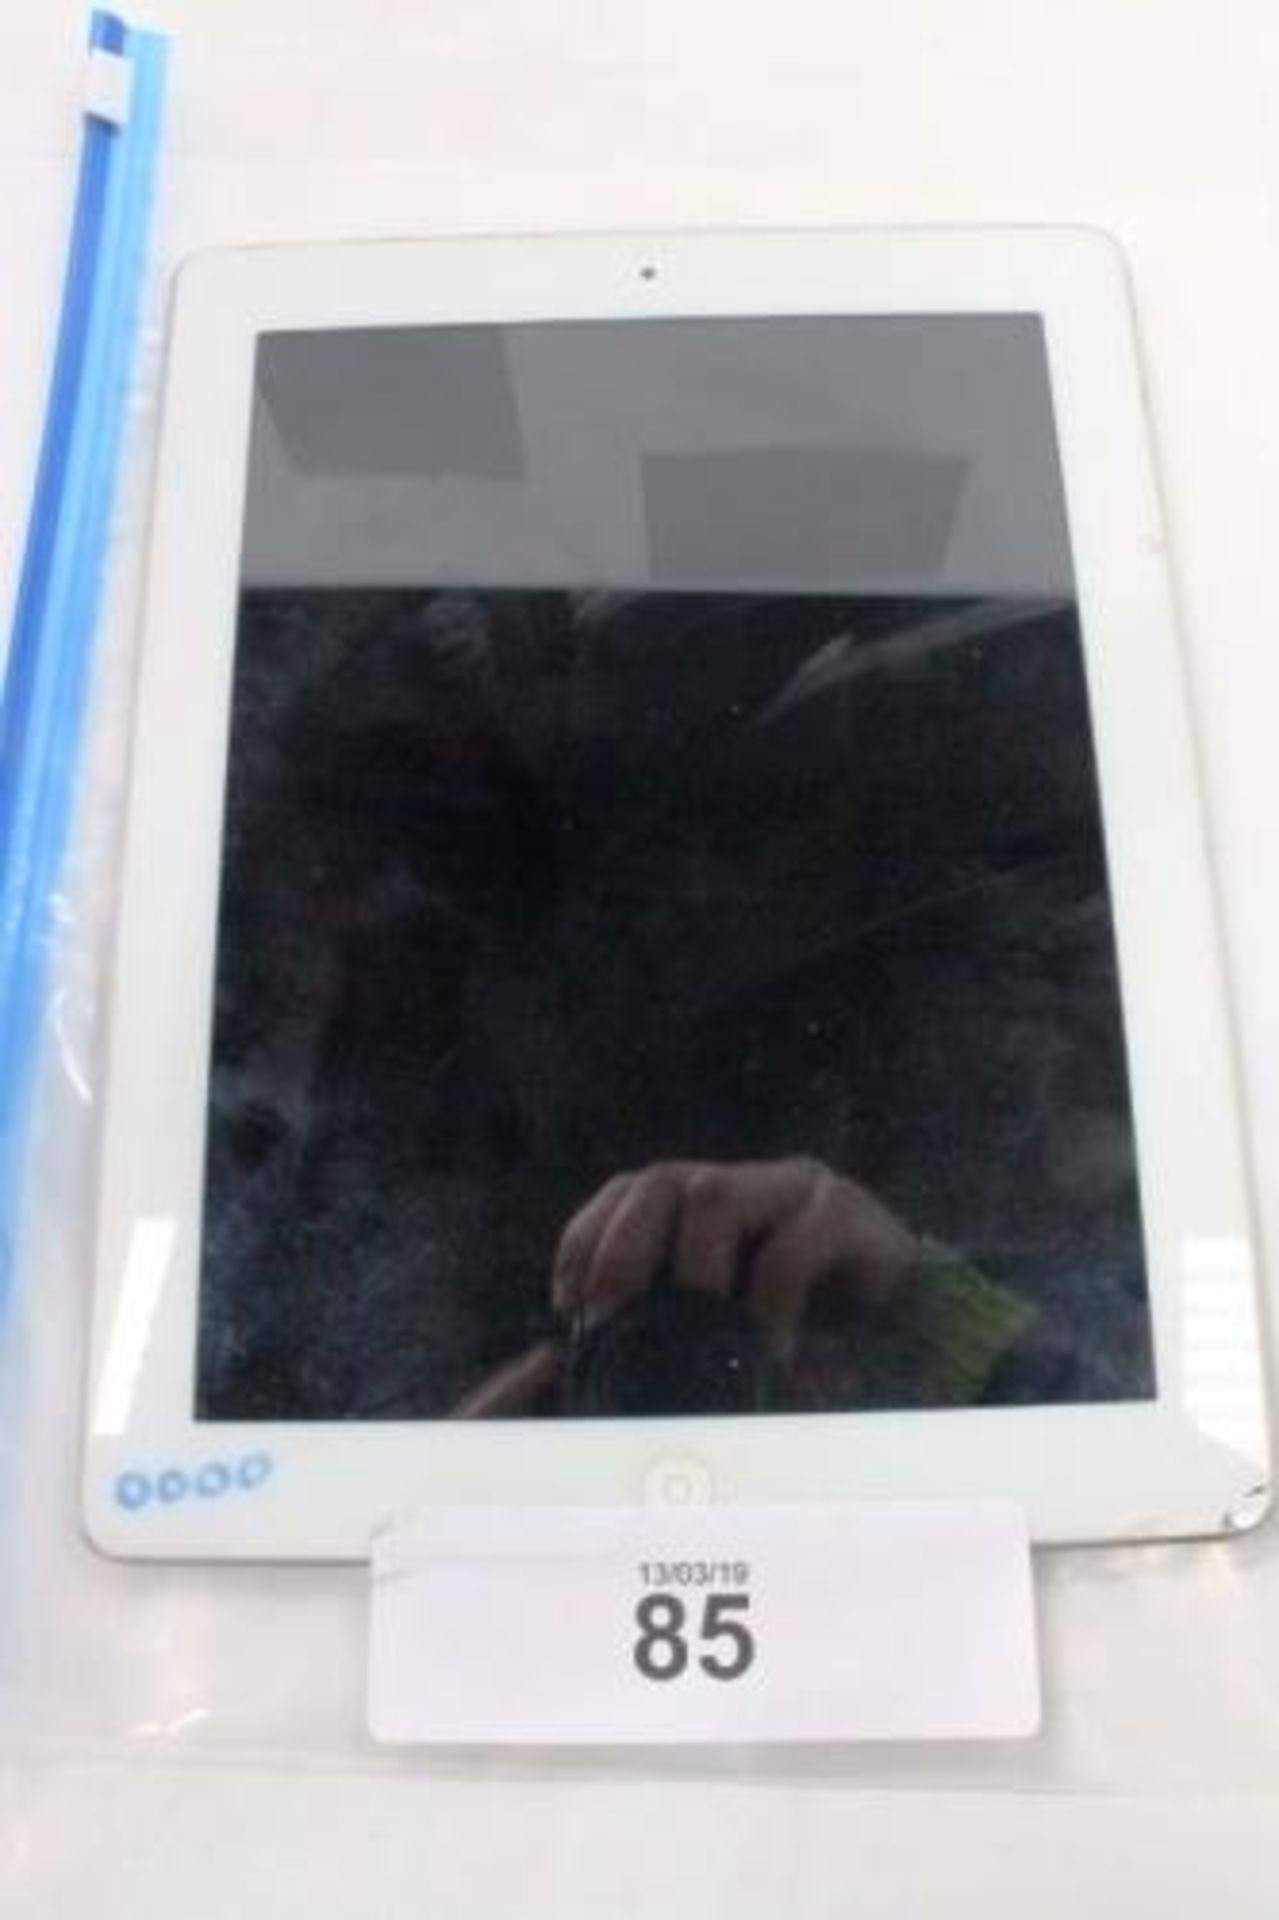 A silver Apple tablet, model A1460, factory reset, powers on, no accessories, damaged glass lower